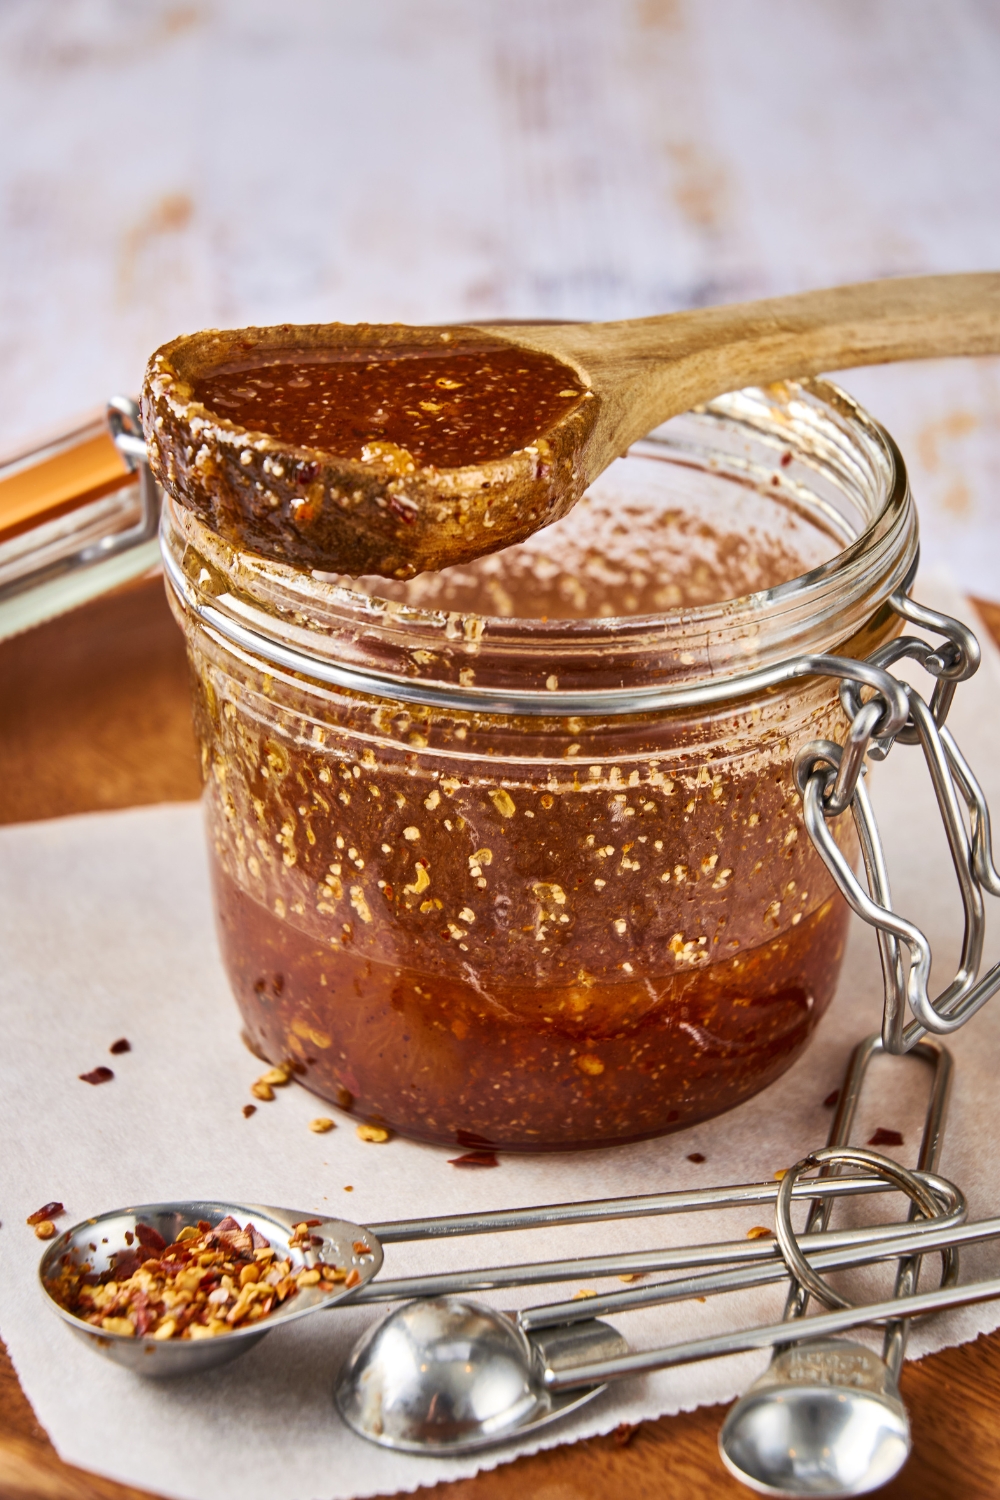 A glass jar full of Popeye's sweet heat sauce sits on a counter top. A wooden spoon covered in sauce rests on the open jar. There are measuring spoons next to the jar.